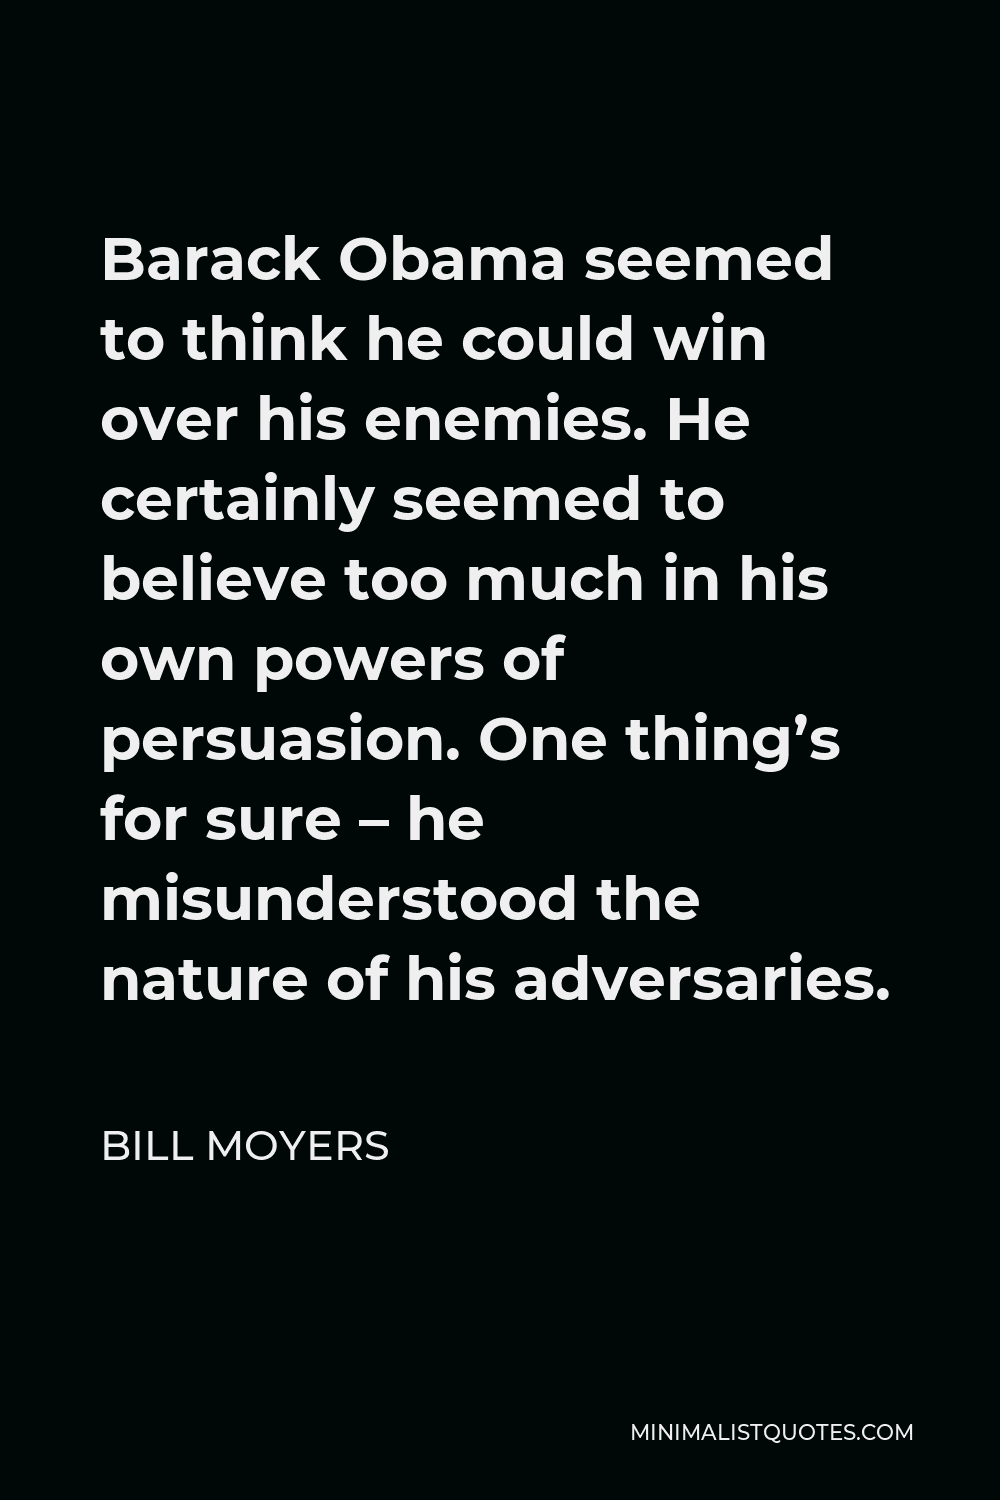 Bill Moyers Quote - Barack Obama seemed to think he could win over his enemies. He certainly seemed to believe too much in his own powers of persuasion. One thing’s for sure – he misunderstood the nature of his adversaries.